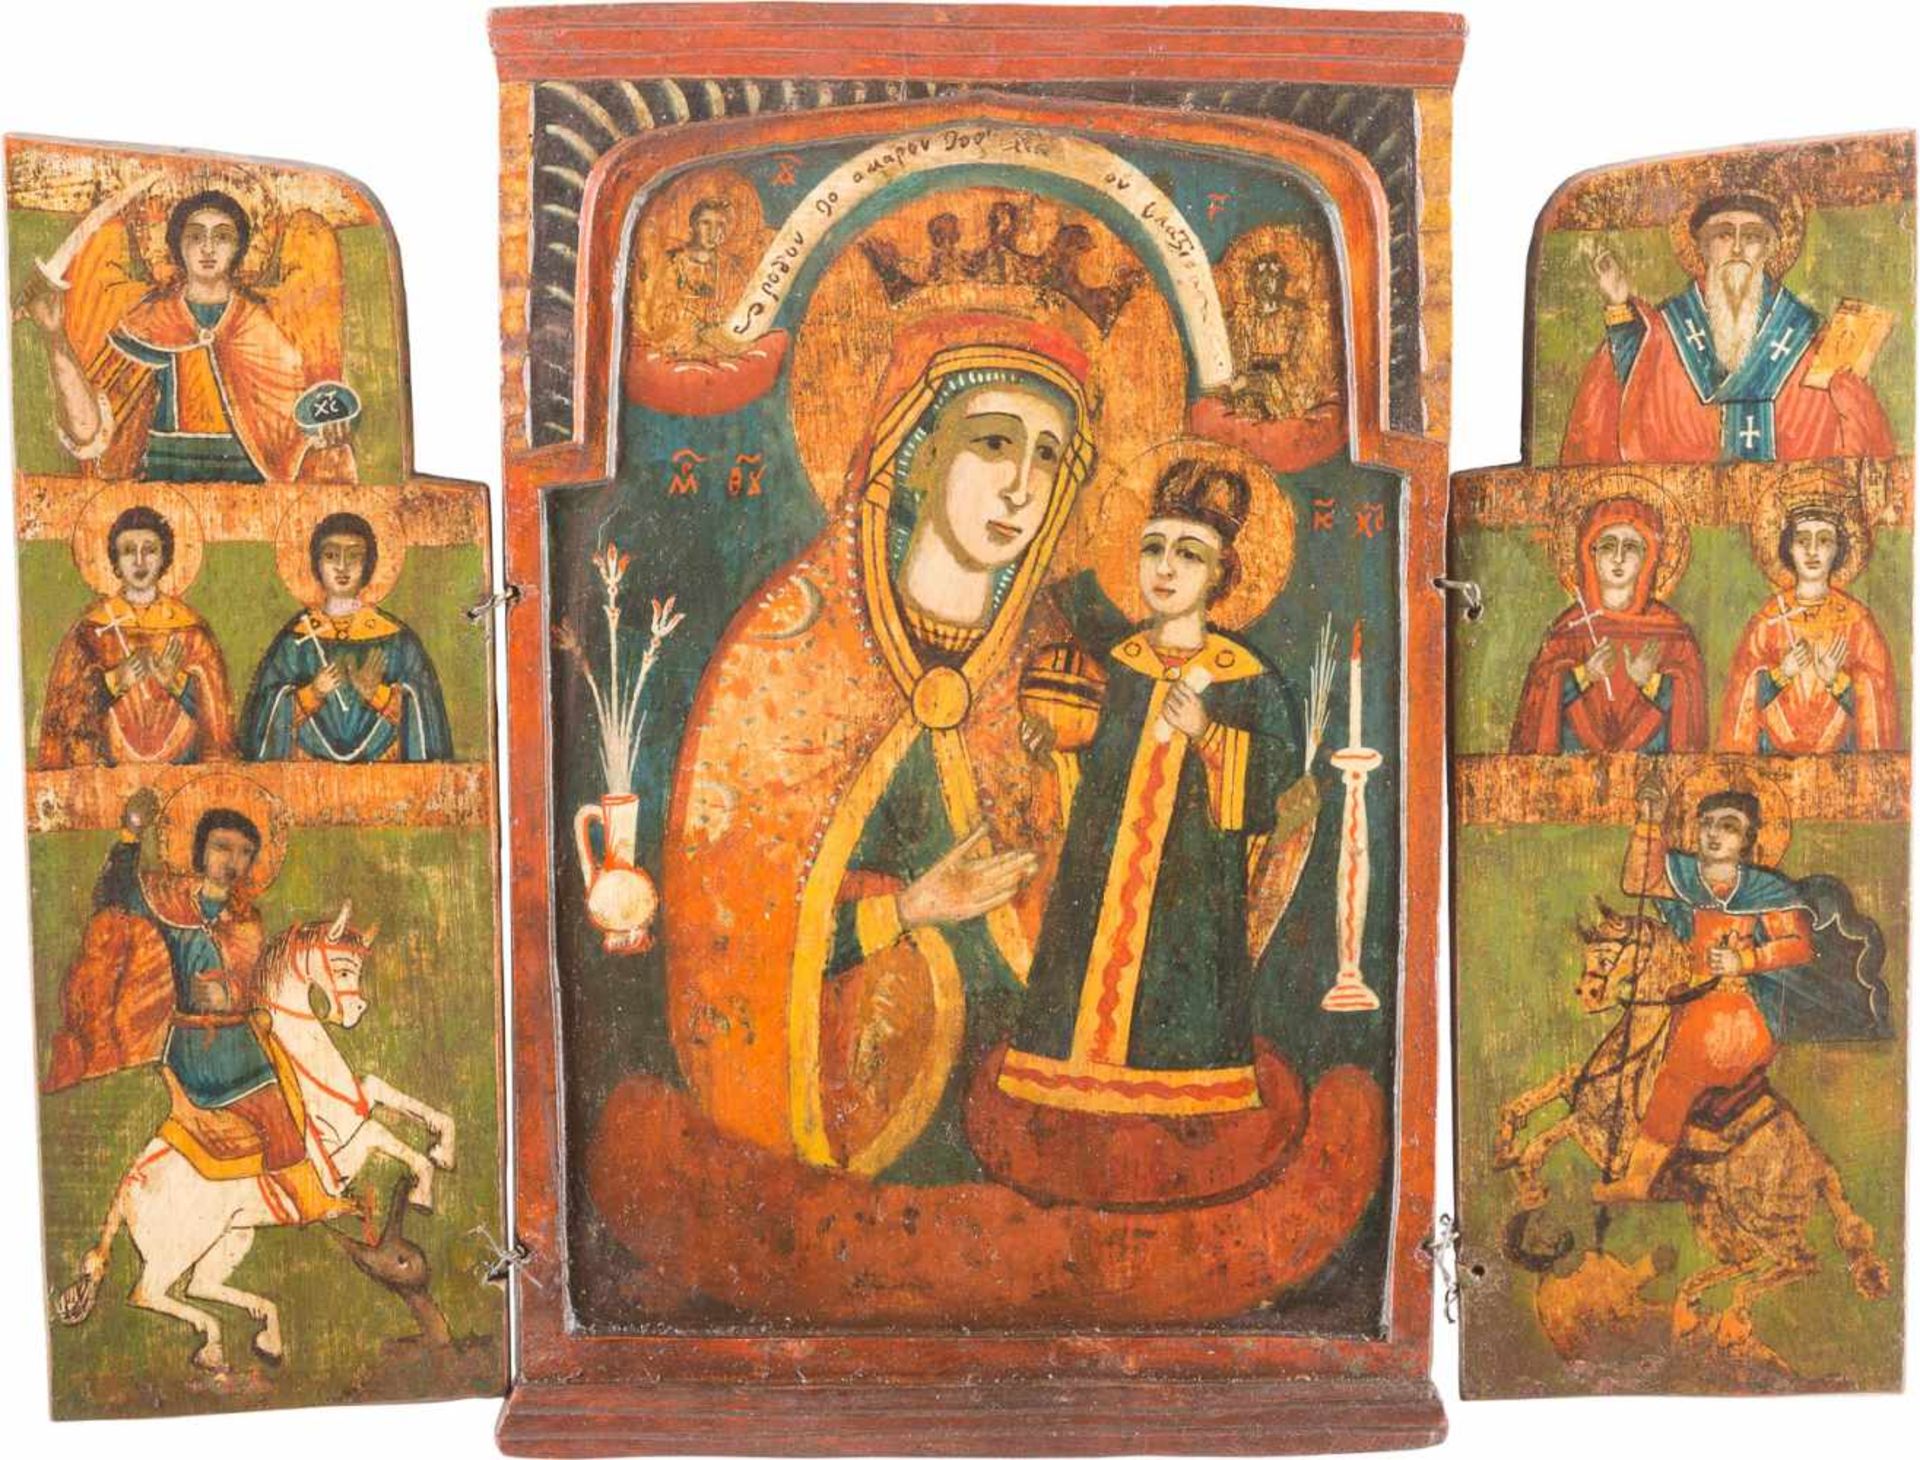 A TRIPTYCH SHOWING THE MOTHER OF GOD AND SELECTED SAINTS